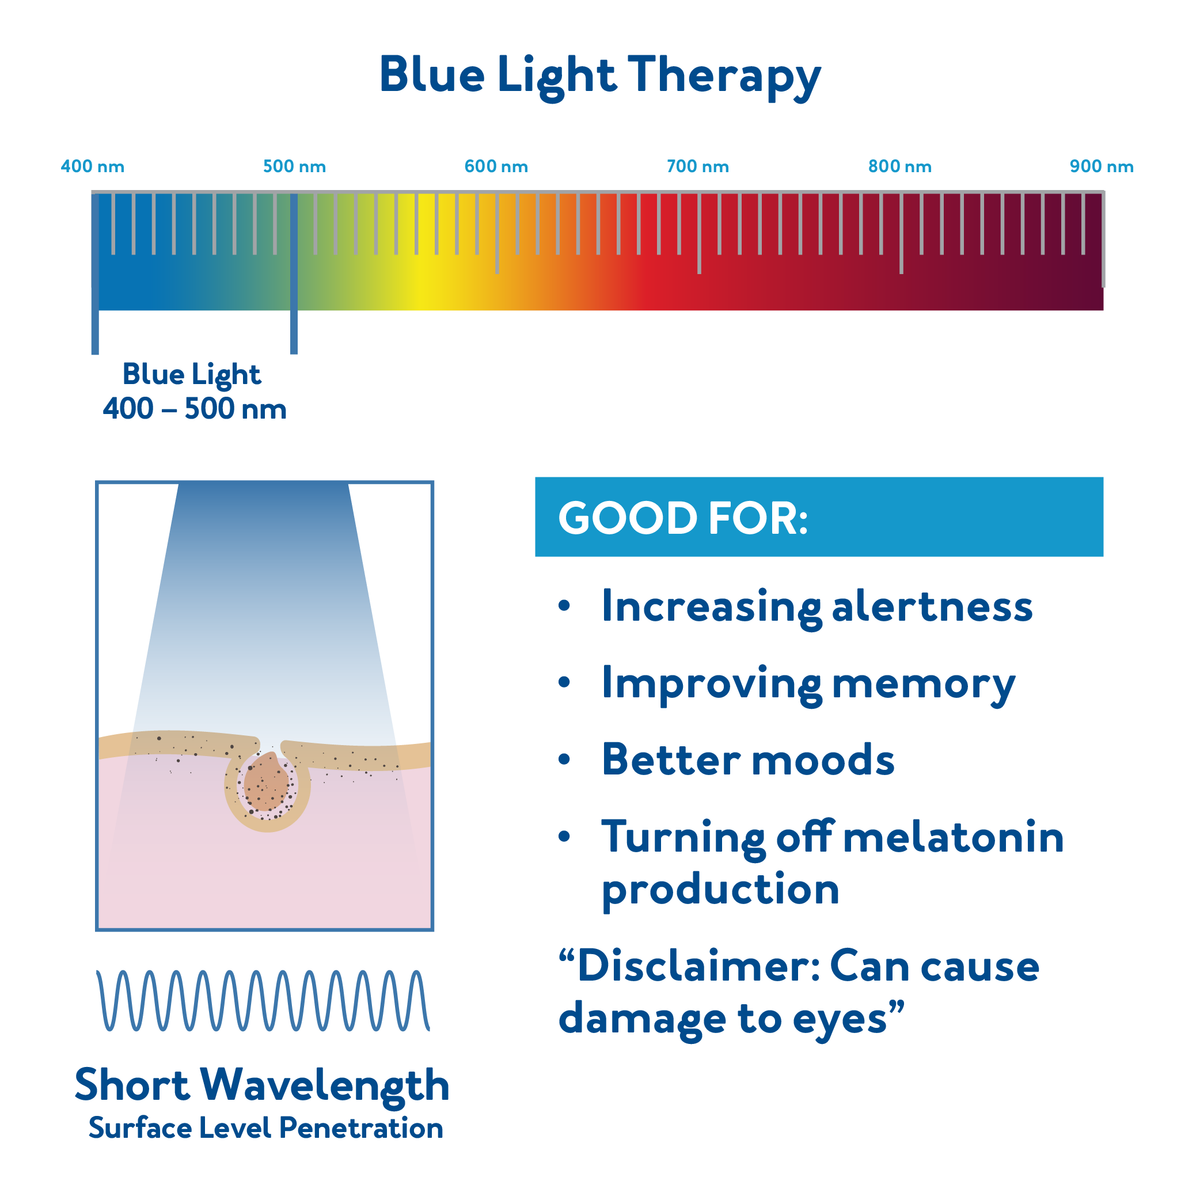 Blue light therapy : Further details are provided below